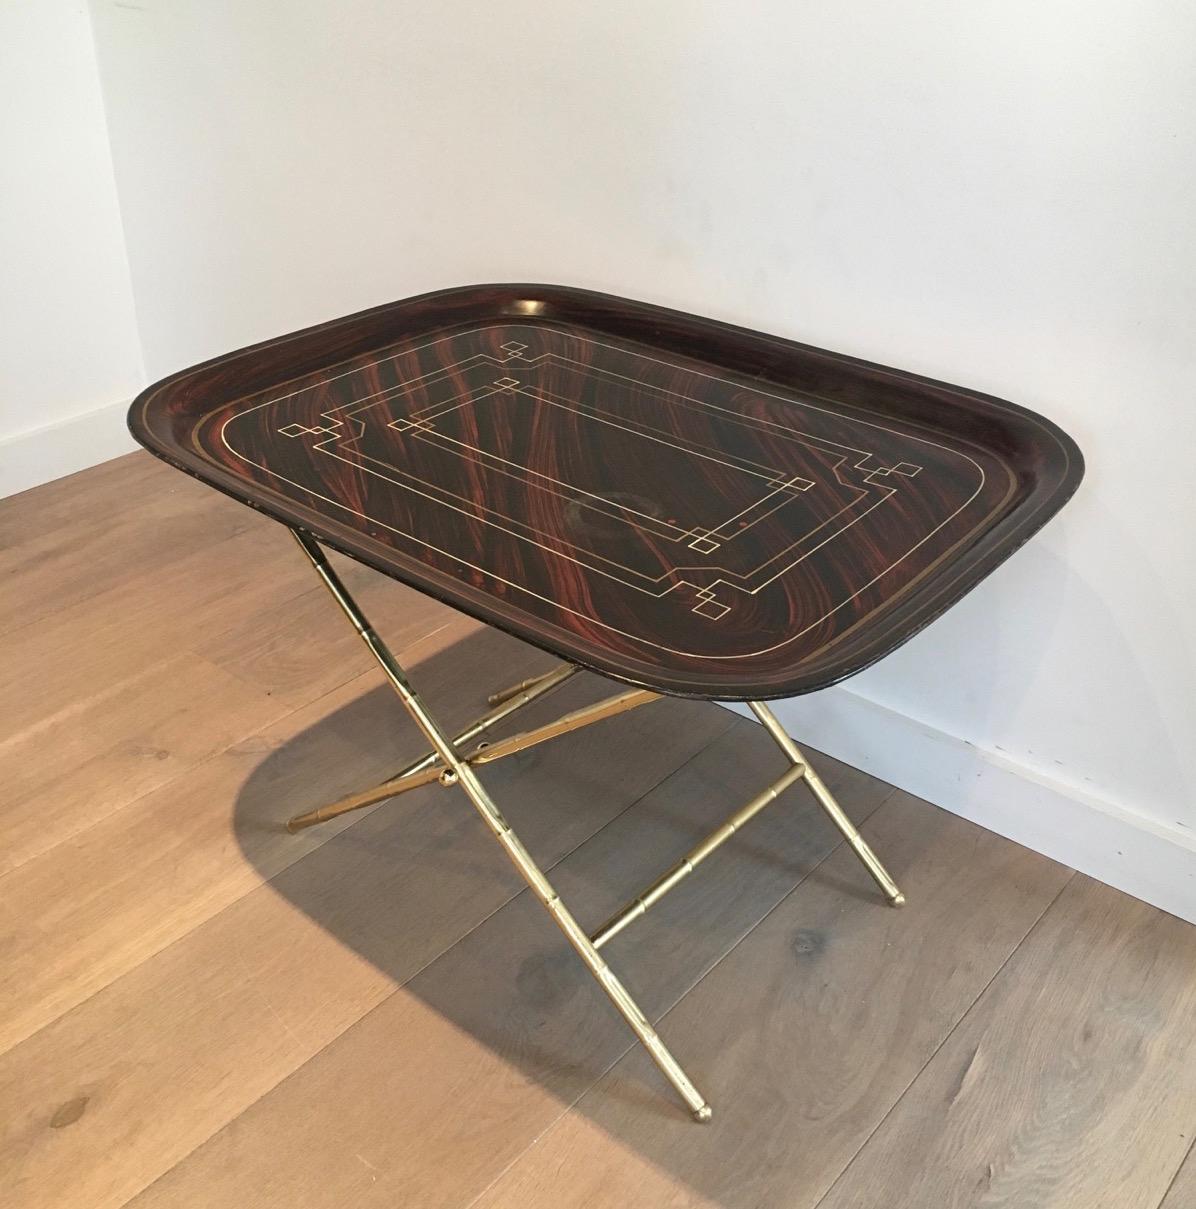 Mid-20th Century Unusual Tray Table in Brass with a Lacquer Tole Top, circa 1950 For Sale